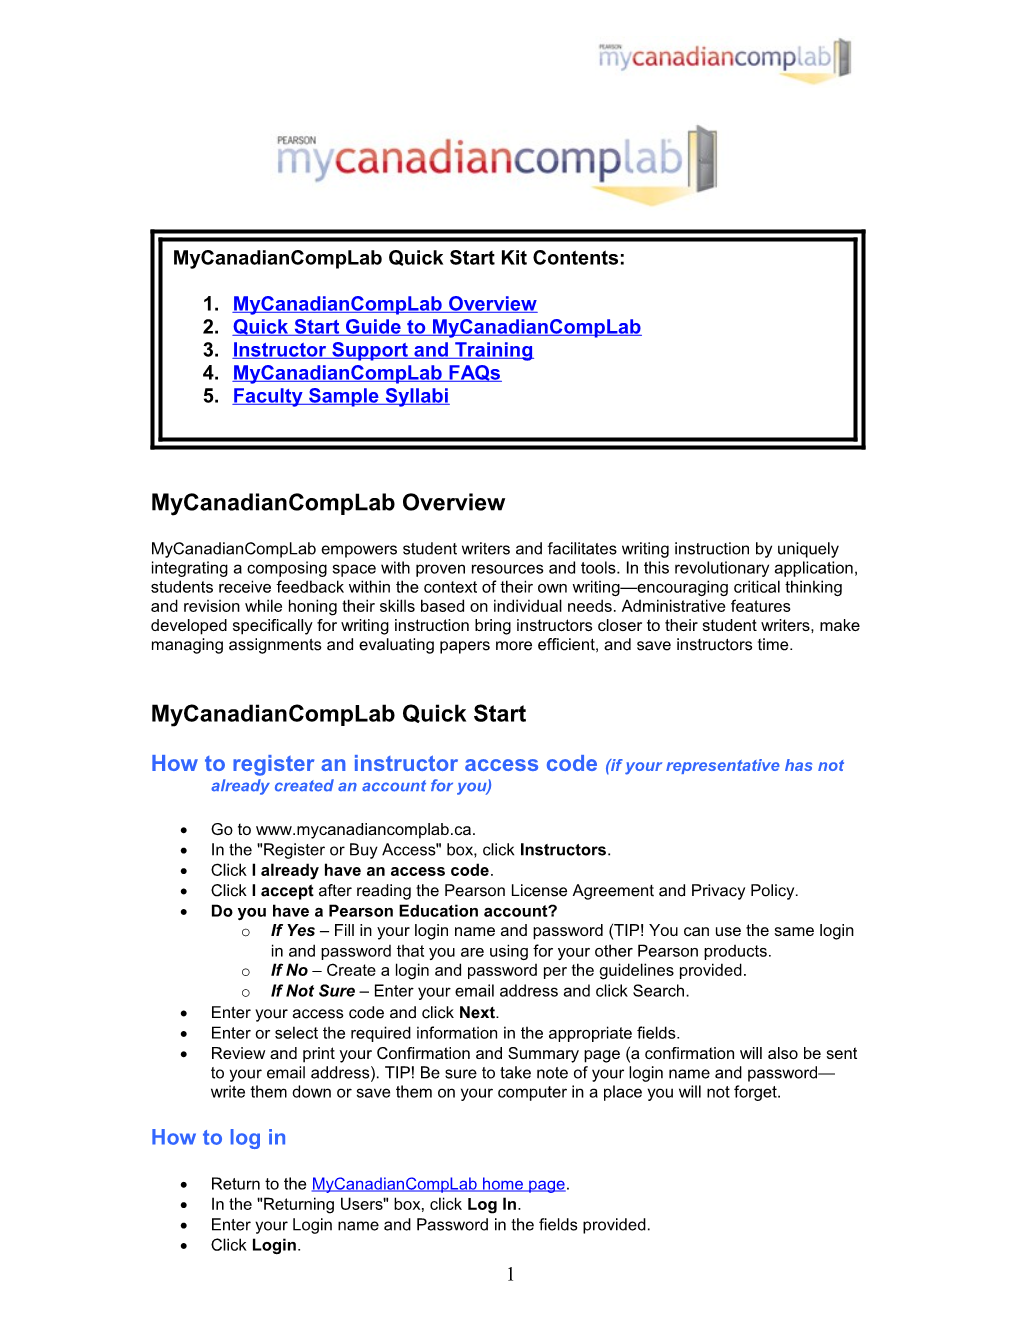 Mycanadiancomplab Overview